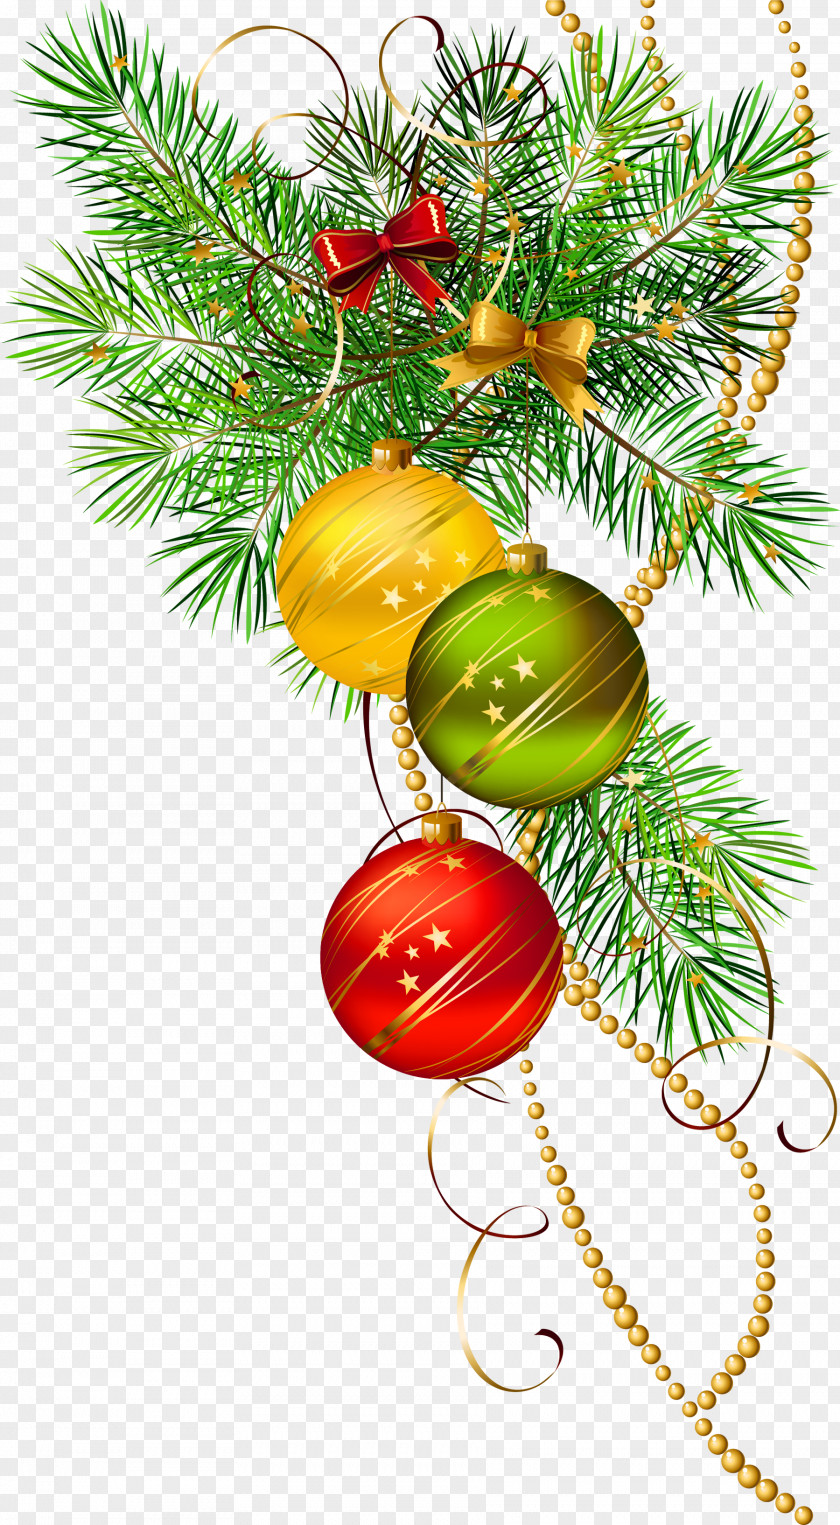 Three Christmas Balls With Pine Branch Clipart Ornament Icon Clip Art PNG